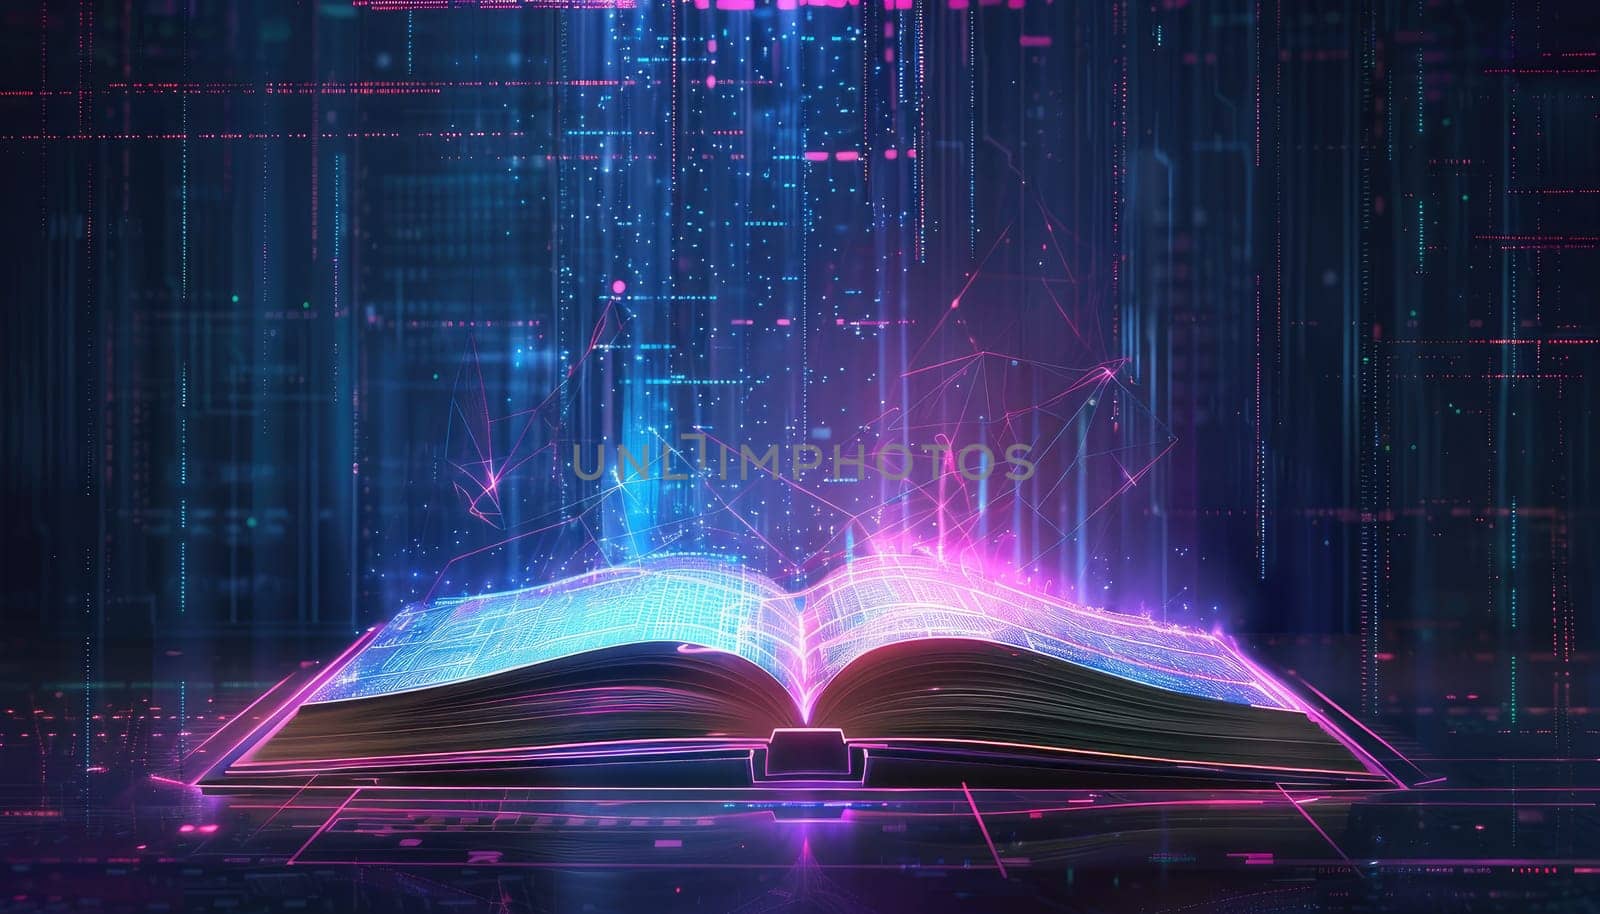 A book is opened on a table with a blue light shining on it by AI generated image.